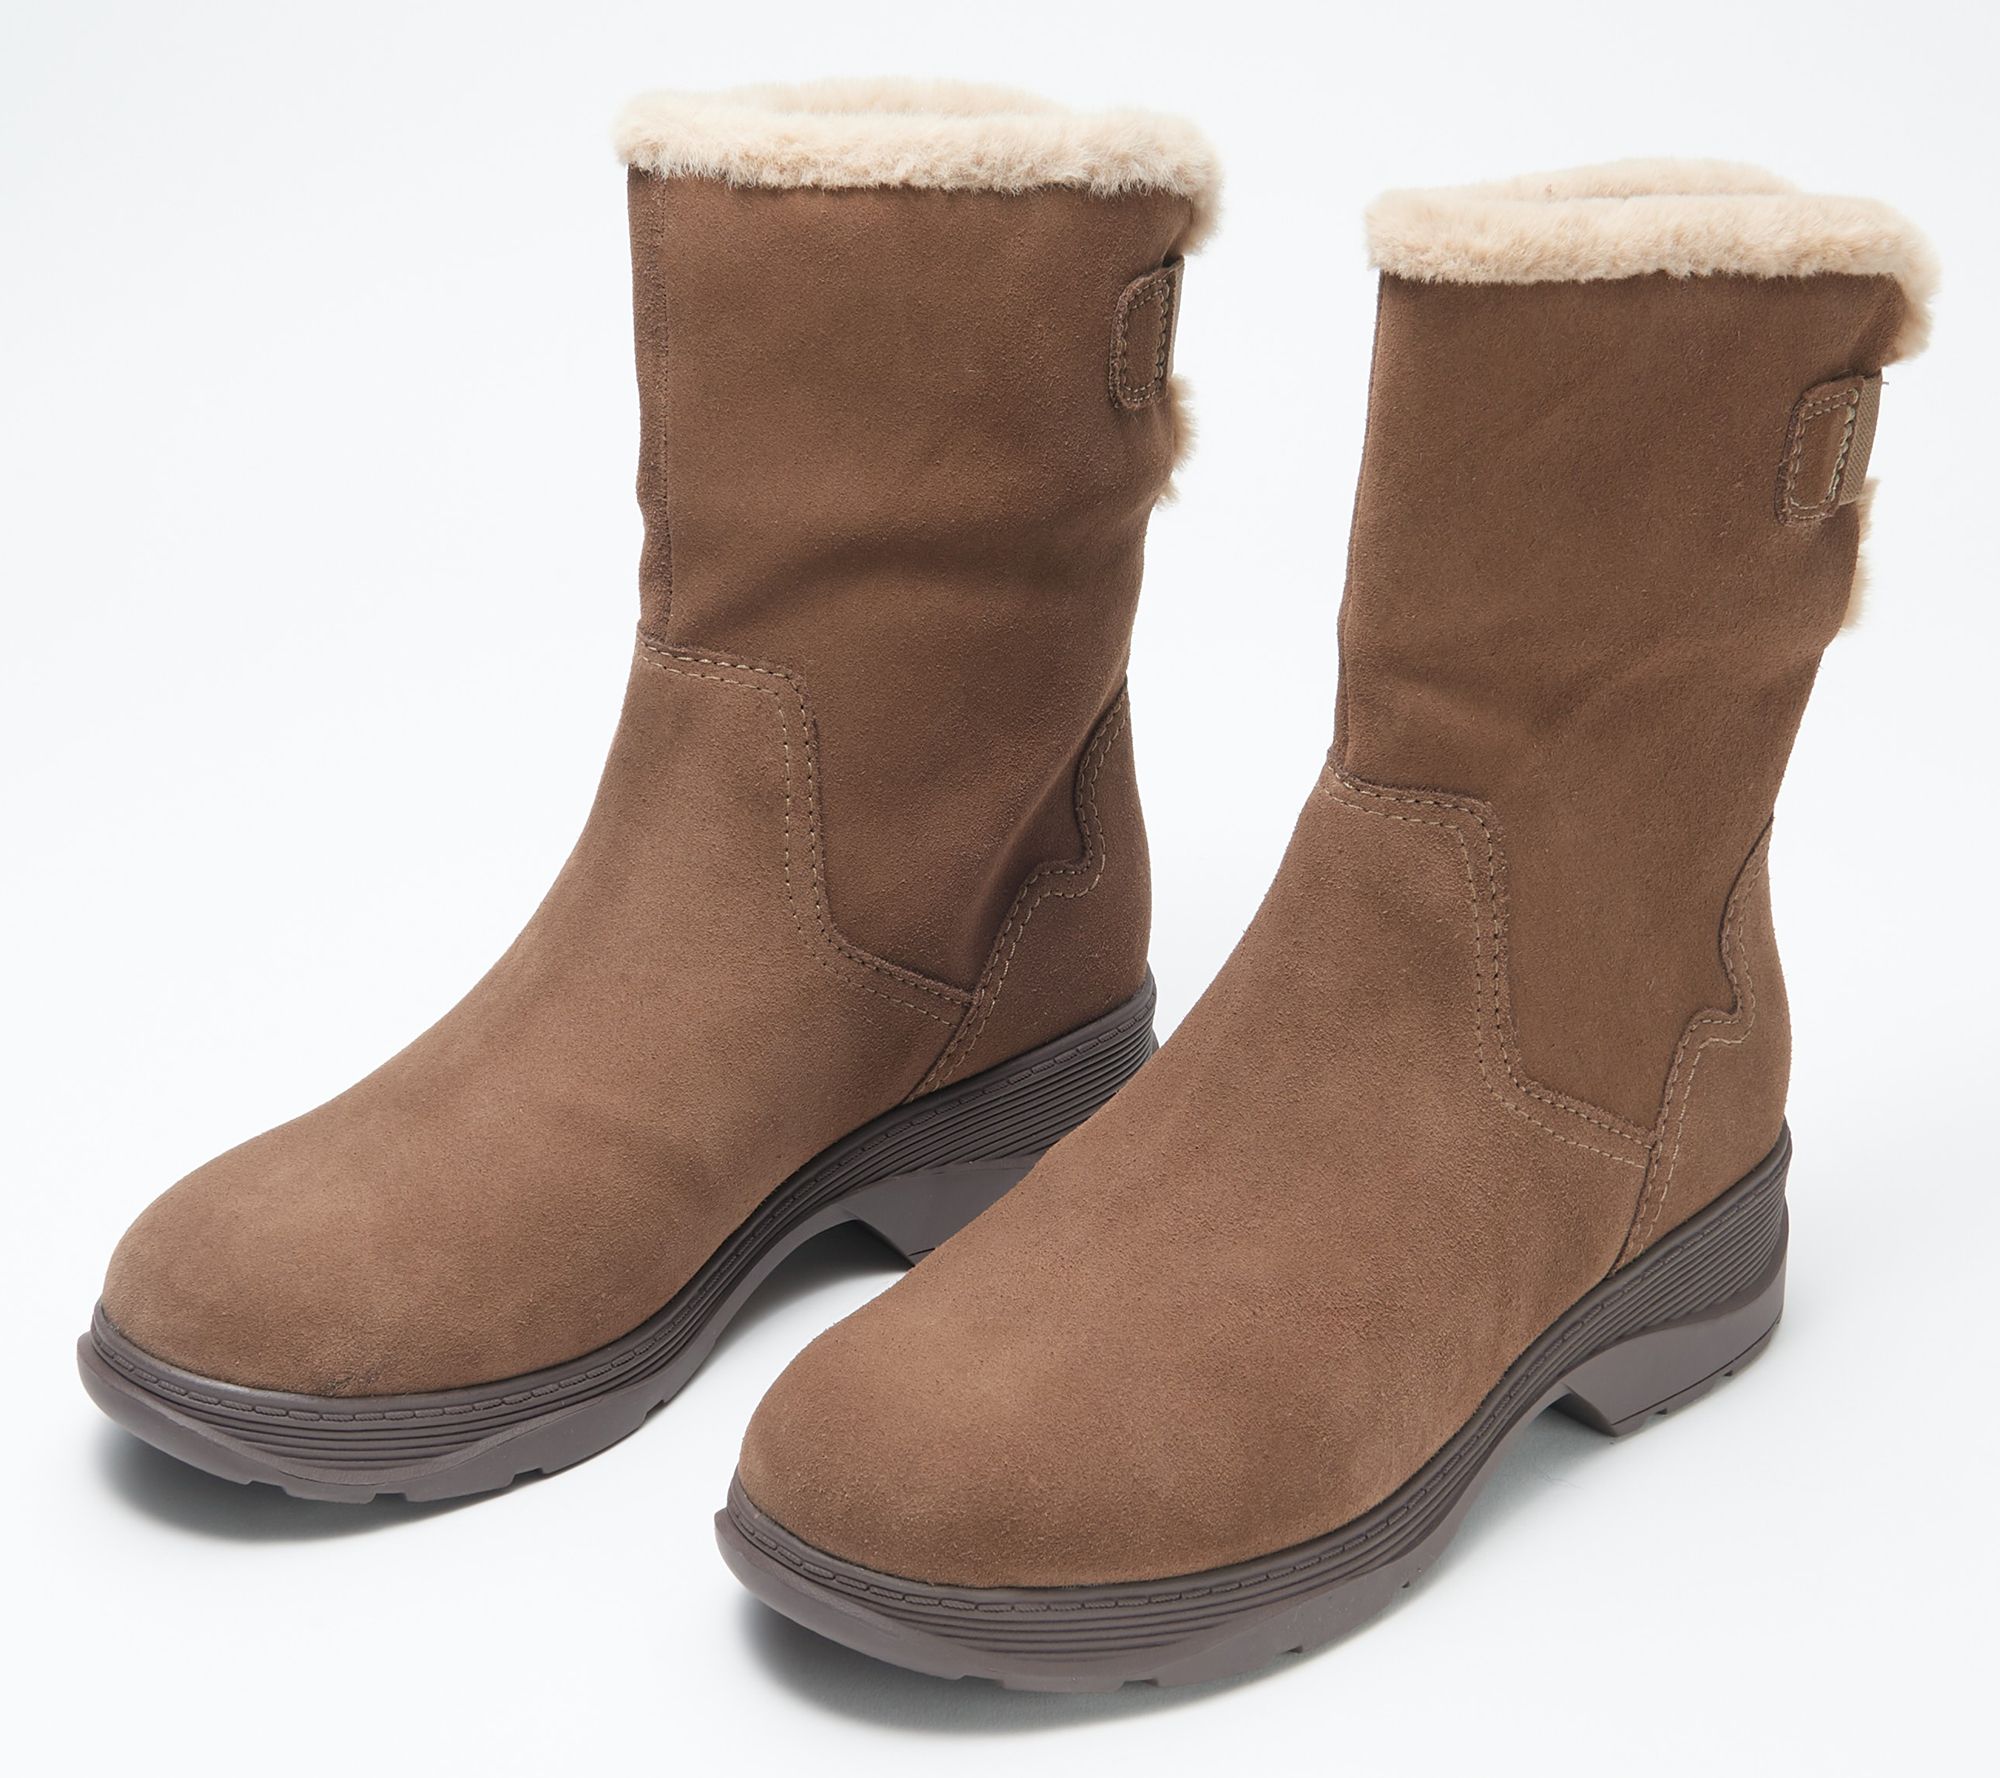 Clarks Collection Waterproof Suede Boots - Pull - QVC.com